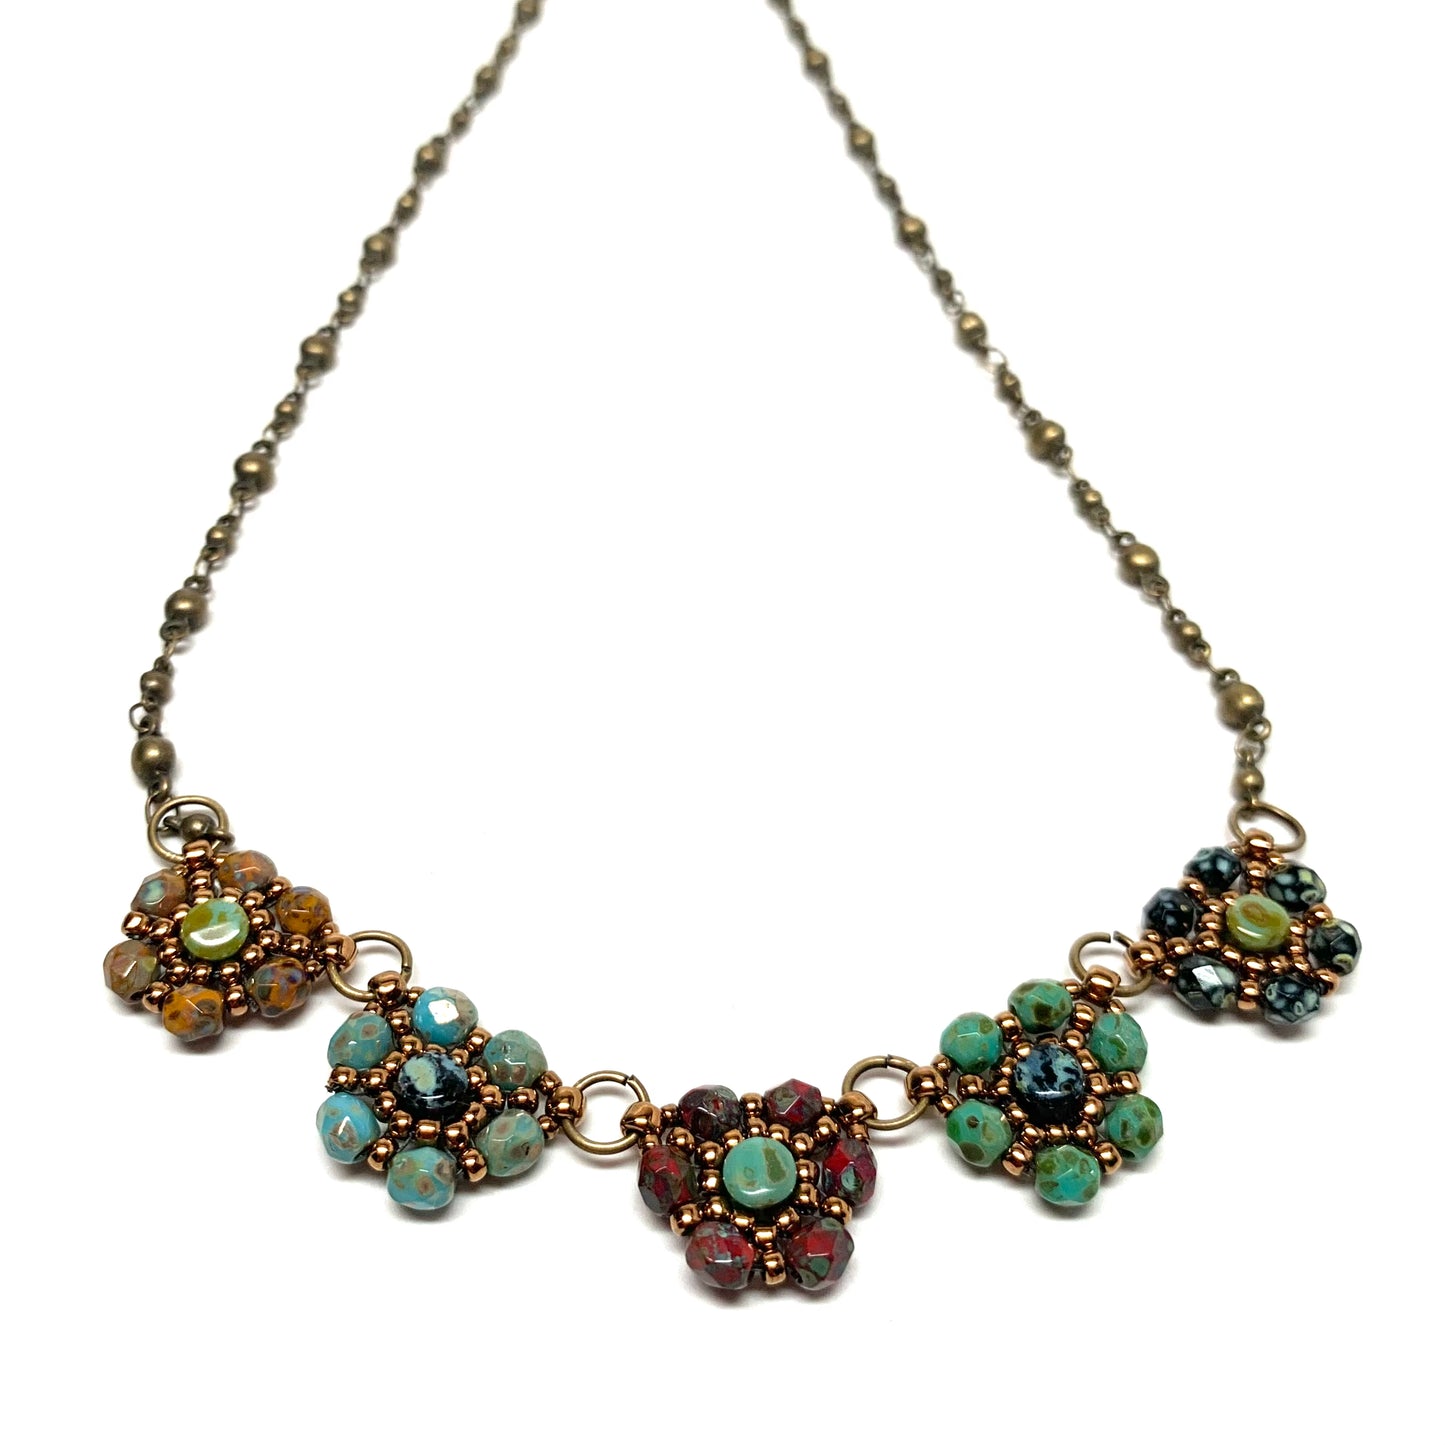 Margarita Link Necklace | Picasso Mix